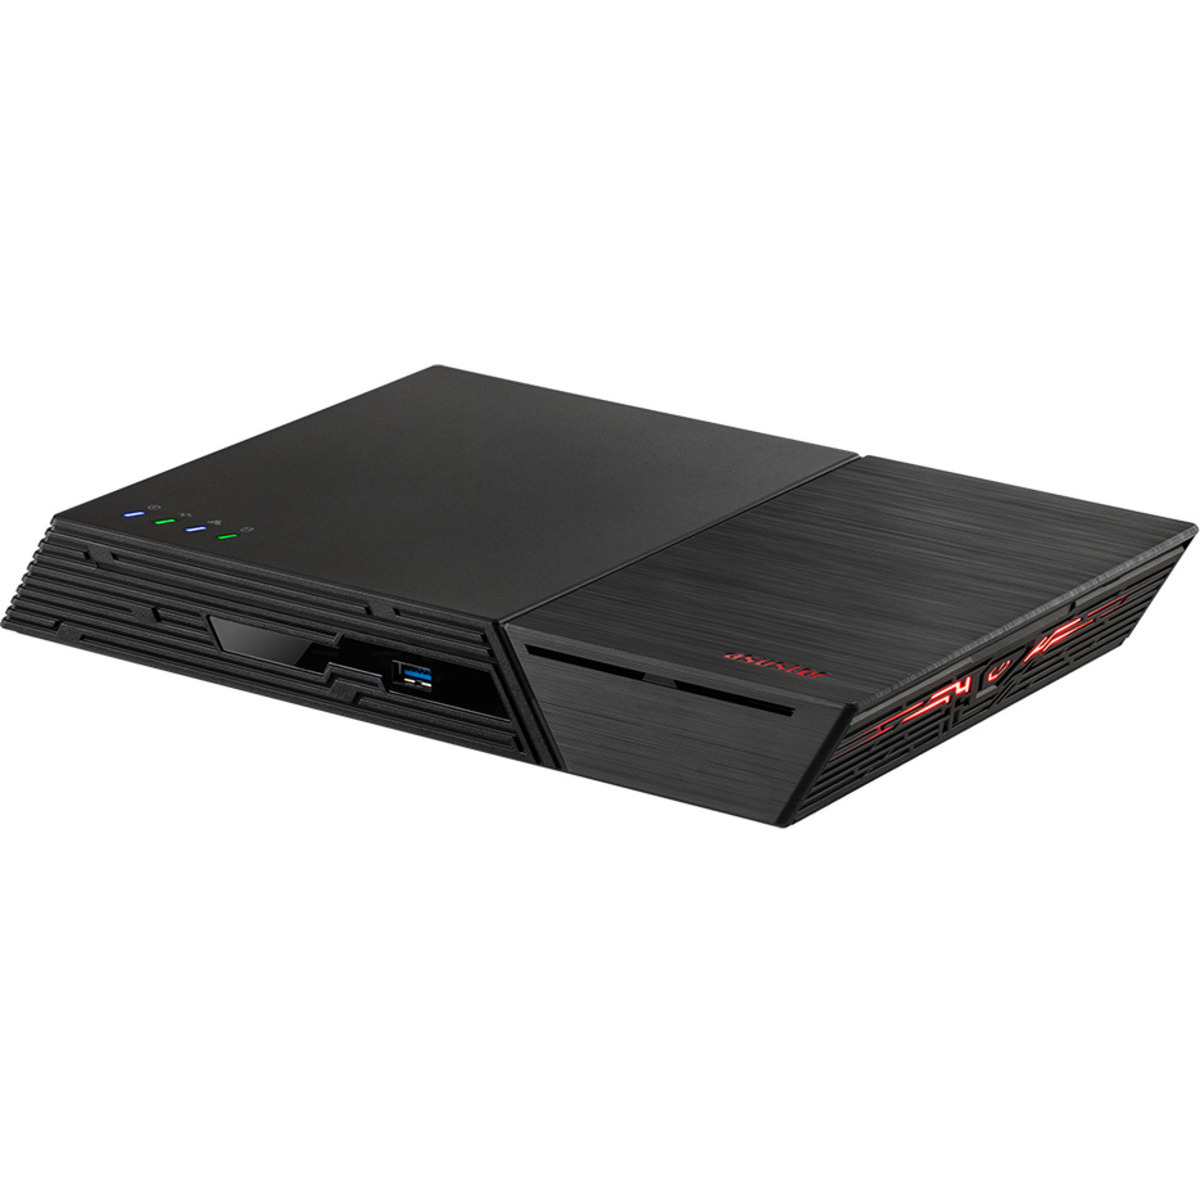 ASUSTOR FLASHSTOR 6 FS6706T 6tb 6-Bay Desktop Multimedia / Power User / Business NAS - Network Attached Storage Device 6x1tb Crucial P3 Plus CT1000P3PSSD8  5000/3600MB/s M.2 2280 NVMe SSD CONSUMER Class Drives Installed - Burn-In Tested - FREE RAM UPGRADE FLASHSTOR 6 FS6706T